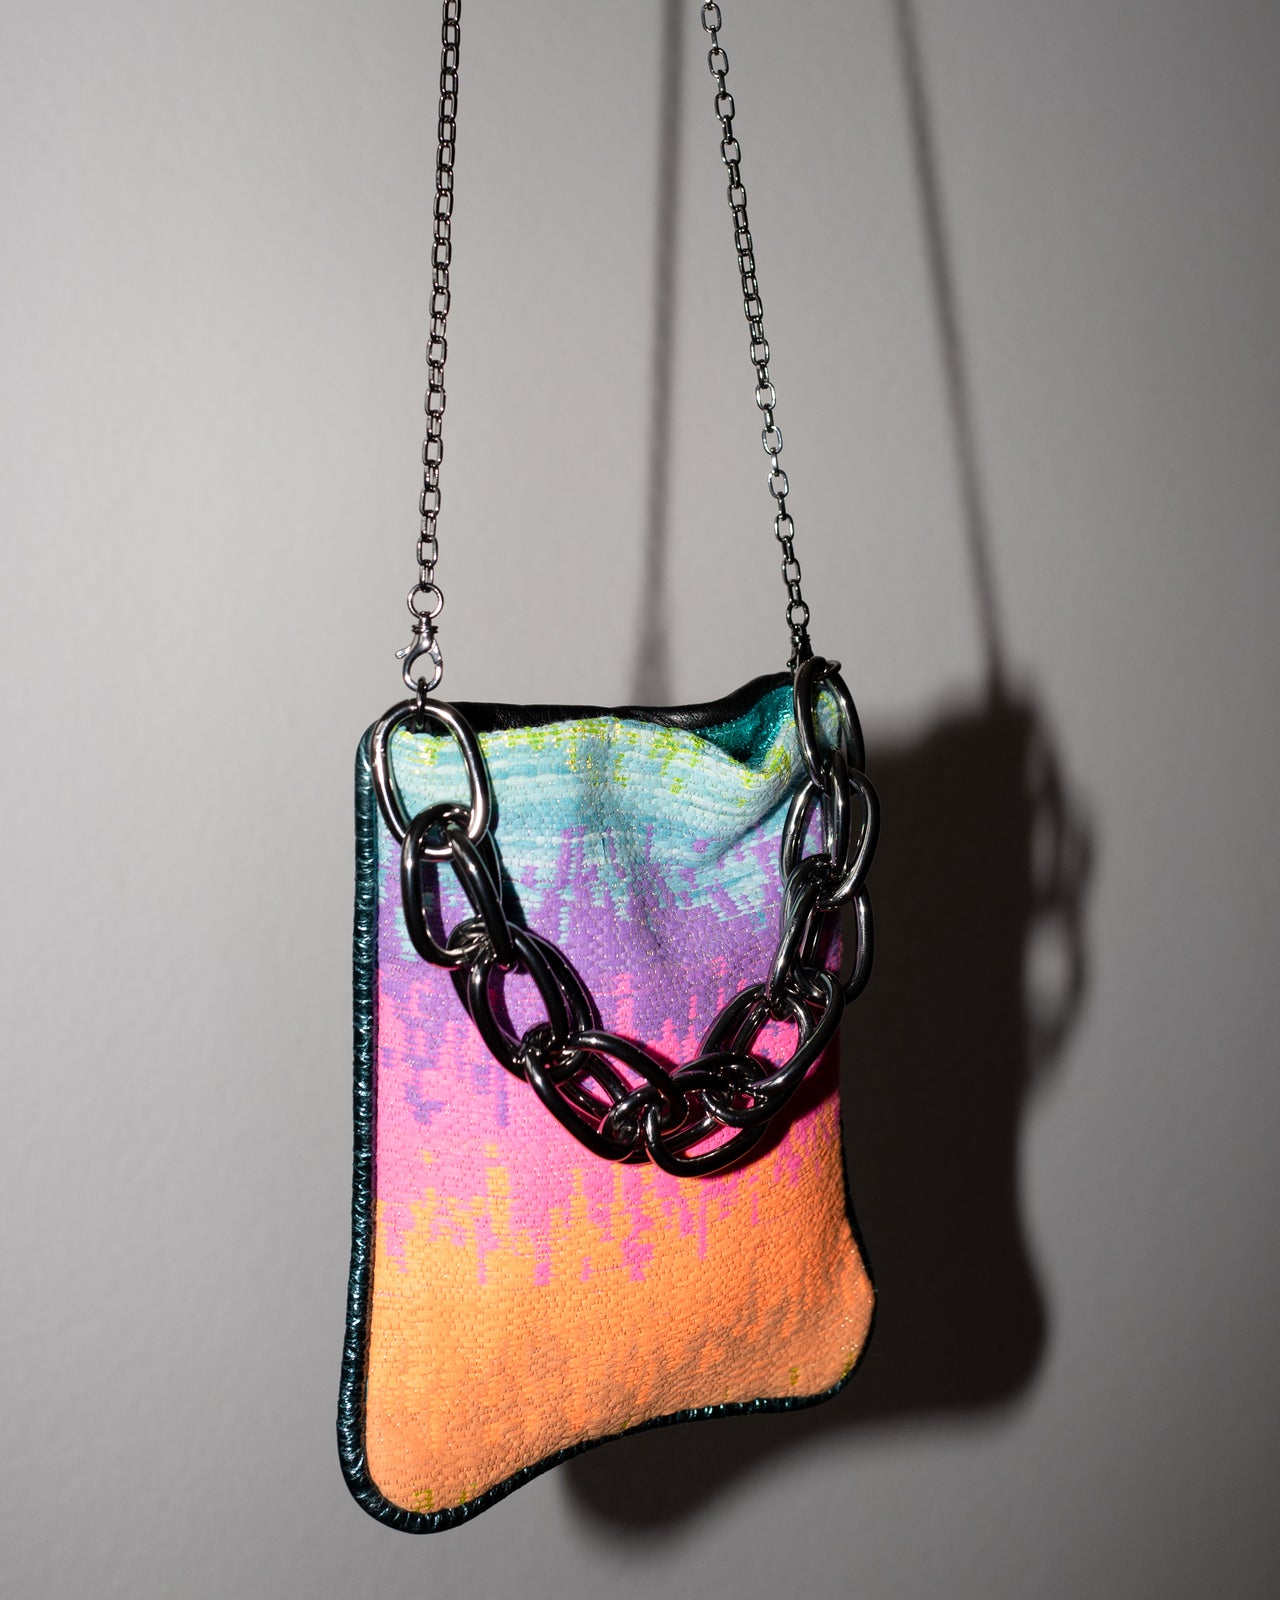 Bag with Rainbow Colored Tweed and Black Leather Gun Metal Chain